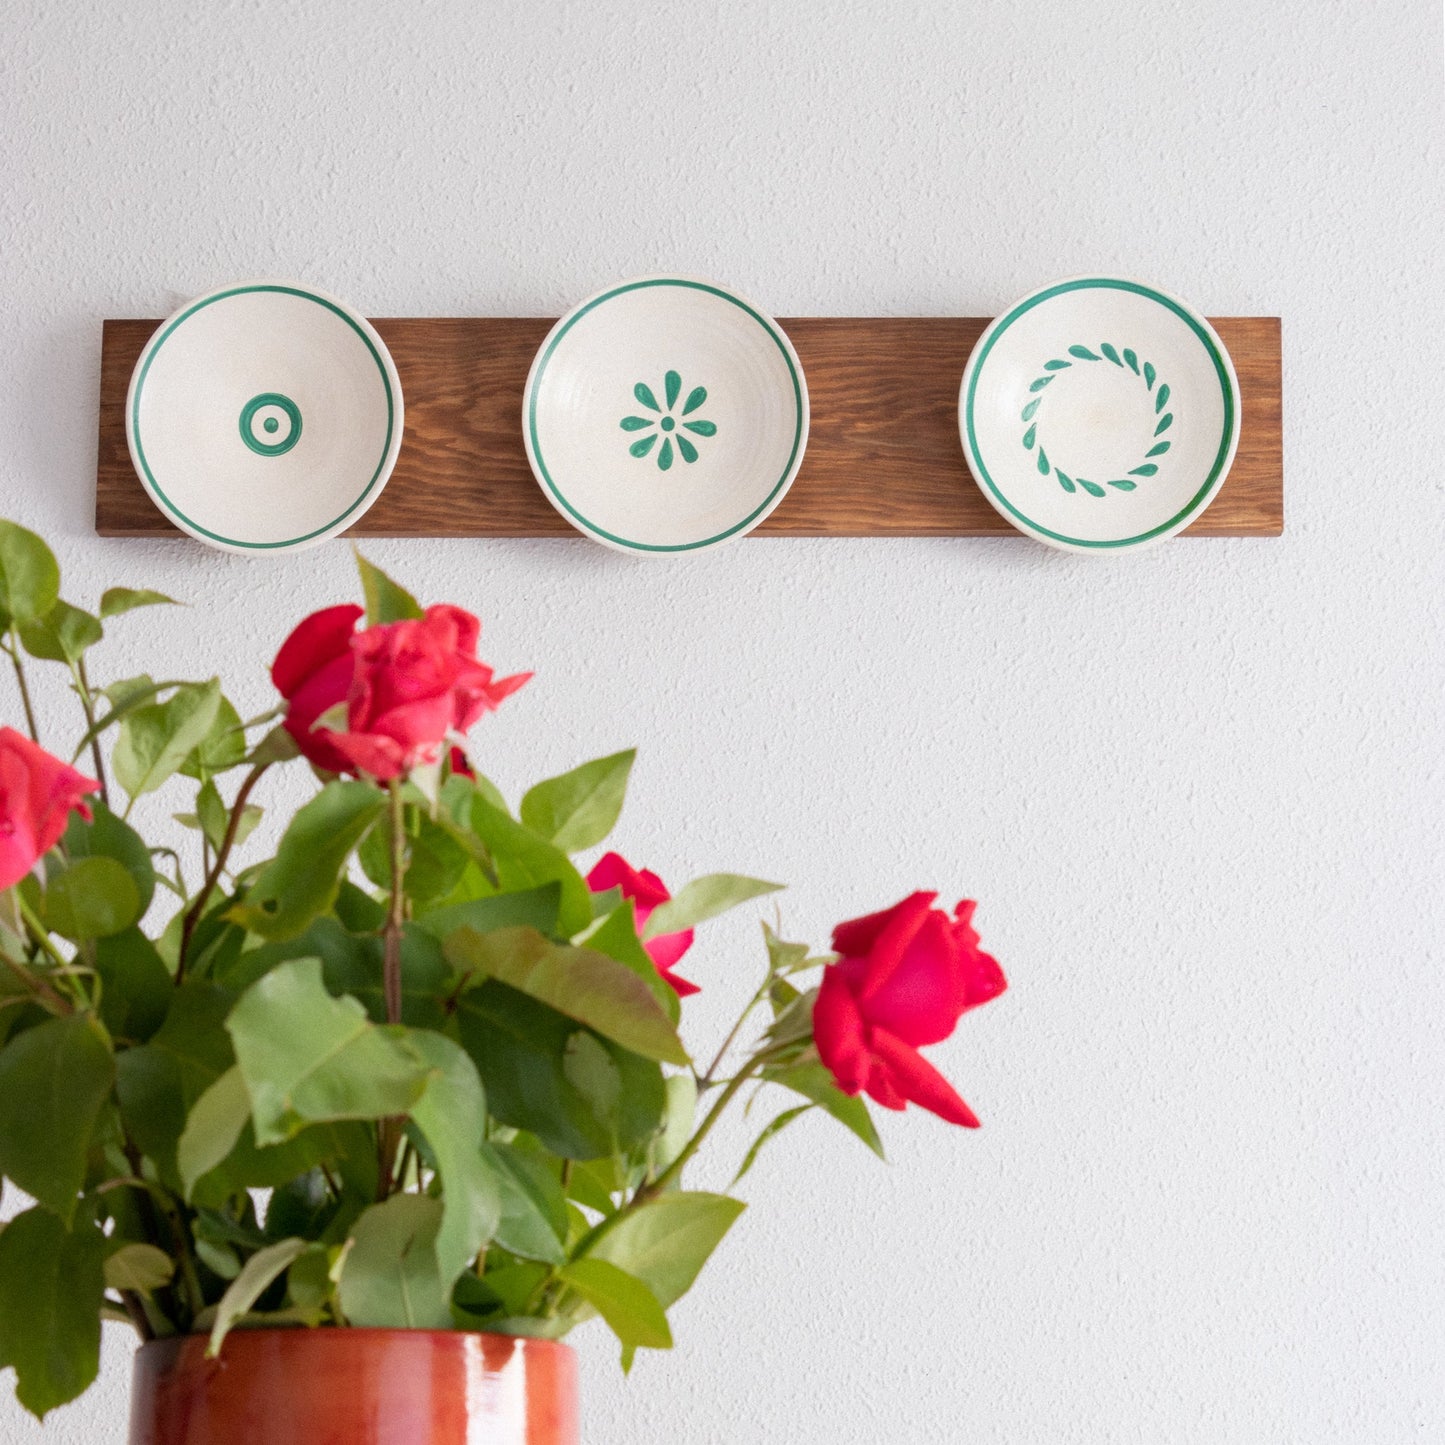 Table for decorative wall plates